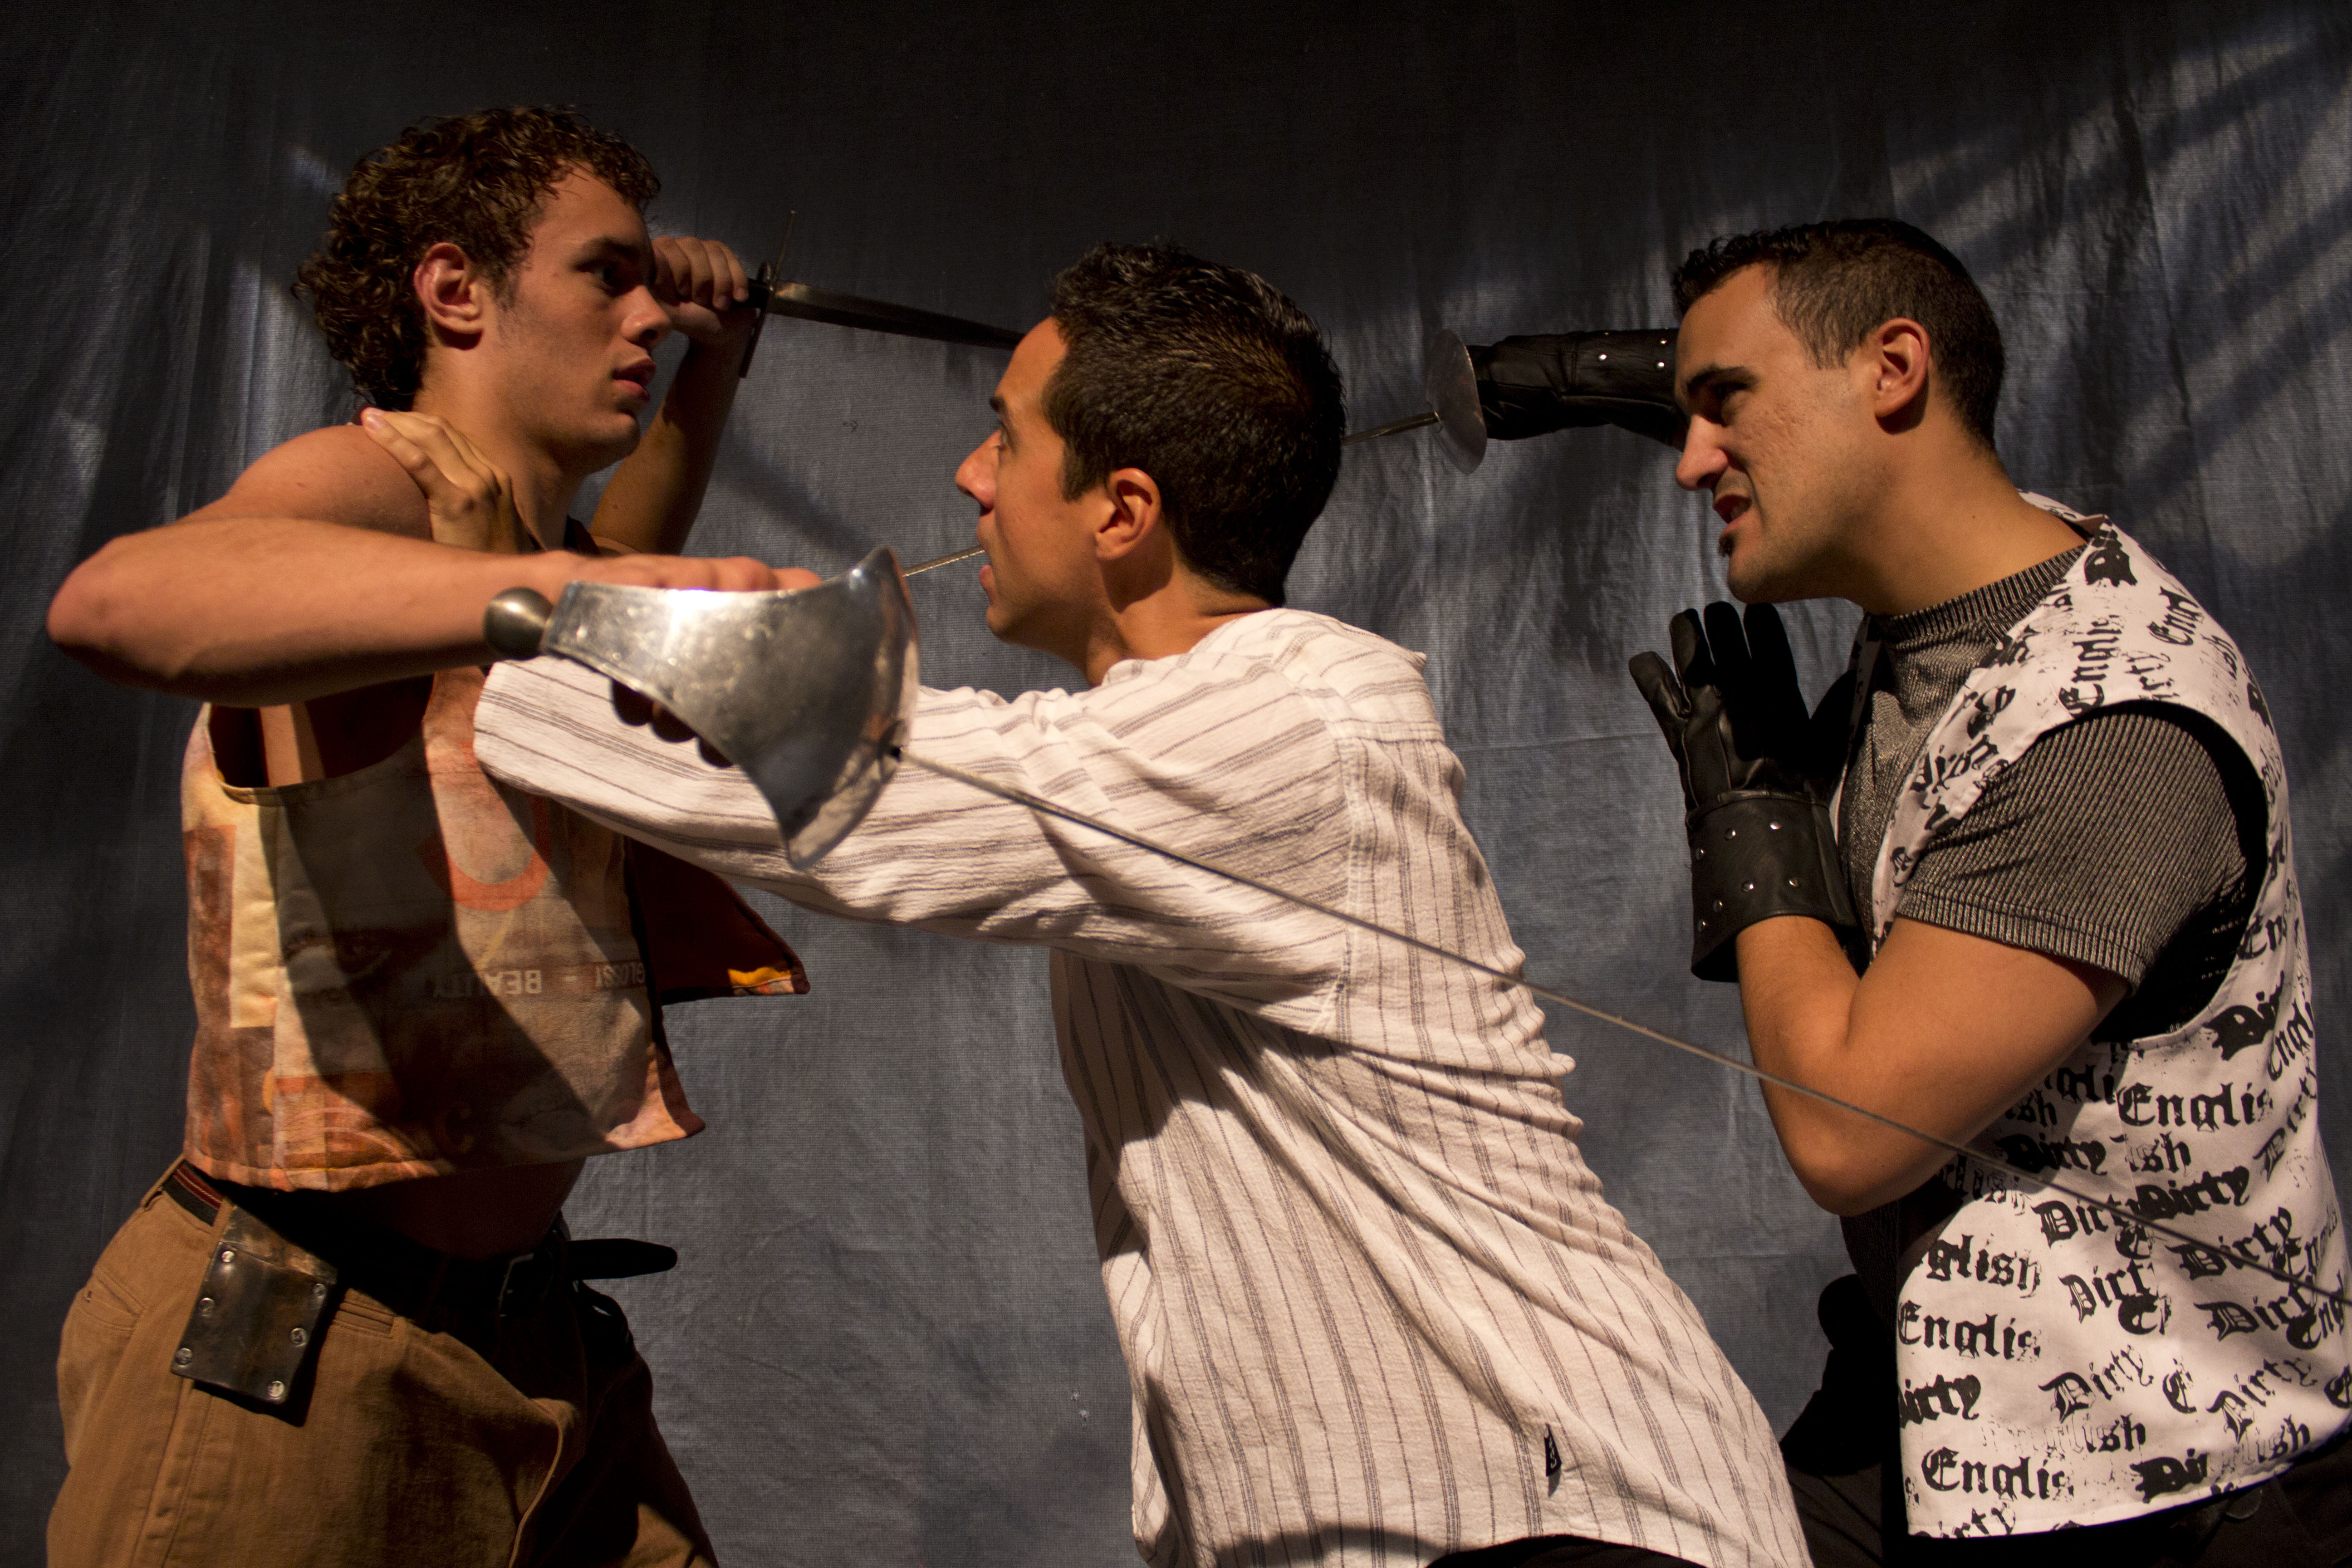 Sam Wiseman as Mercutio, Phillip Herrington as Romeo and Joseph Cannon as Tybalt in Romeo and Juliet at Theater Works, 2011 (Photo by Bo Allen)